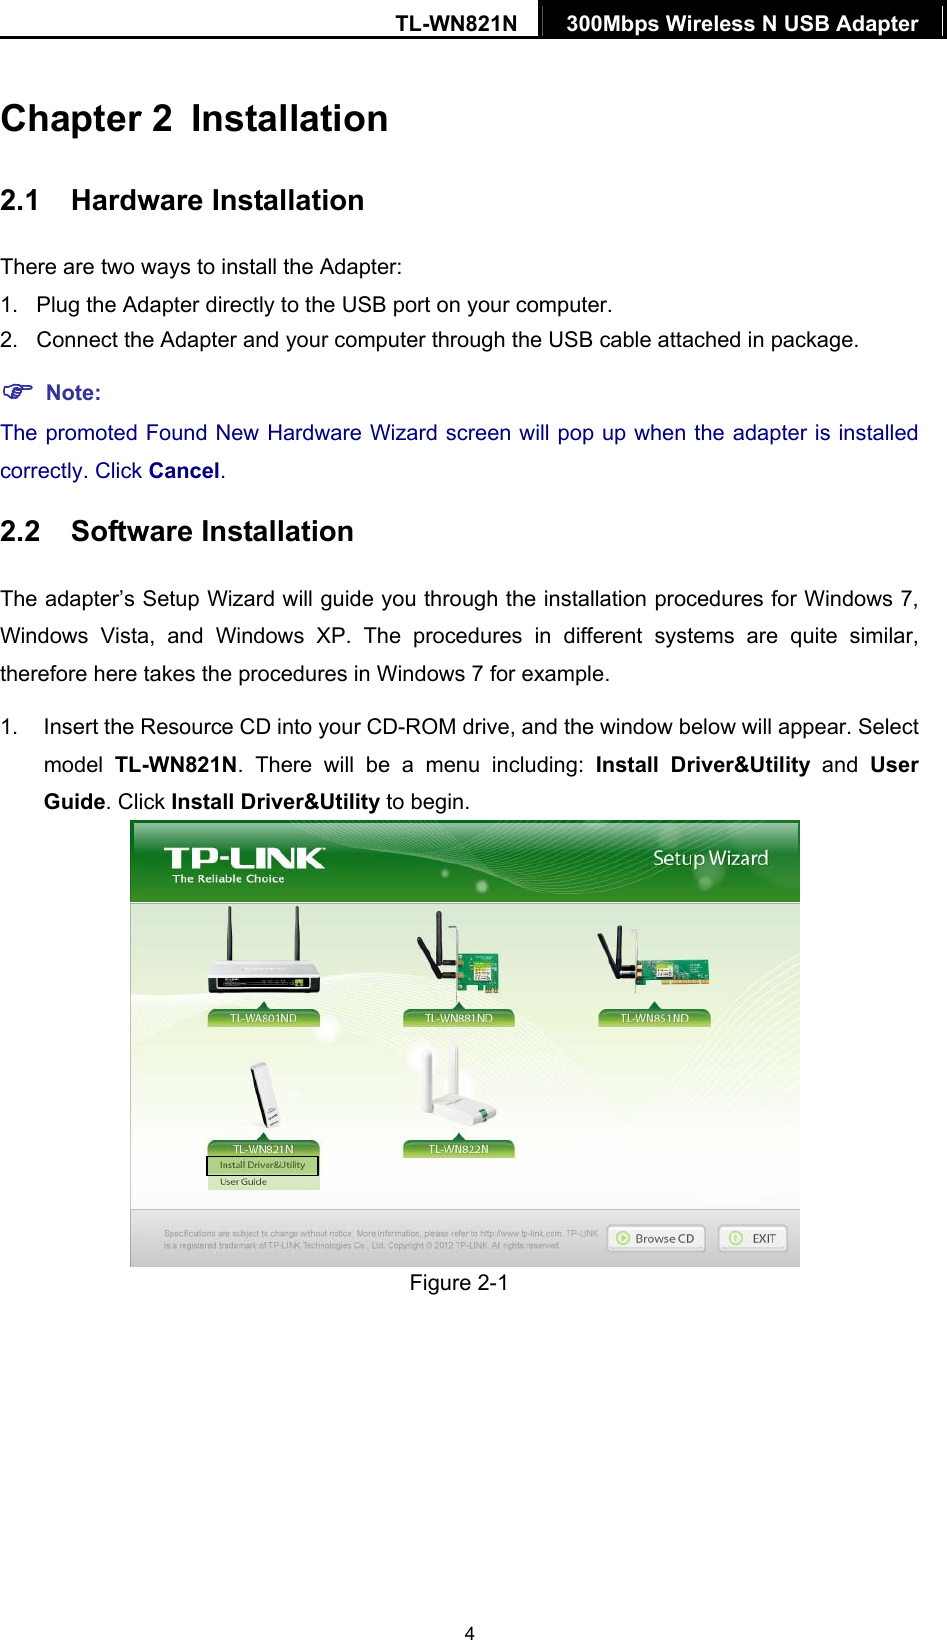 TL-WN821N  300Mbps Wireless N USB Adapter   4Chapter 2  Installation 2.1  Hardware Installation There are two ways to install the Adapter: 1.  Plug the Adapter directly to the USB port on your computer. 2.  Connect the Adapter and your computer through the USB cable attached in package.    Note: The promoted Found New Hardware Wizard screen will pop up when the adapter is installed correctly. Click Cancel. 2.2  Software Installation The adapter’s Setup Wizard will guide you through the installation procedures for Windows 7, Windows Vista, and Windows XP. The procedures in different systems are quite similar, therefore here takes the procedures in Windows 7 for example.   1.  Insert the Resource CD into your CD-ROM drive, and the window below will appear. Select model  TL-WN821N. There will be a menu including: Install Driver&amp;Utility and User Guide. Click Install Driver&amp;Utility to begin.   Figure 2-1 